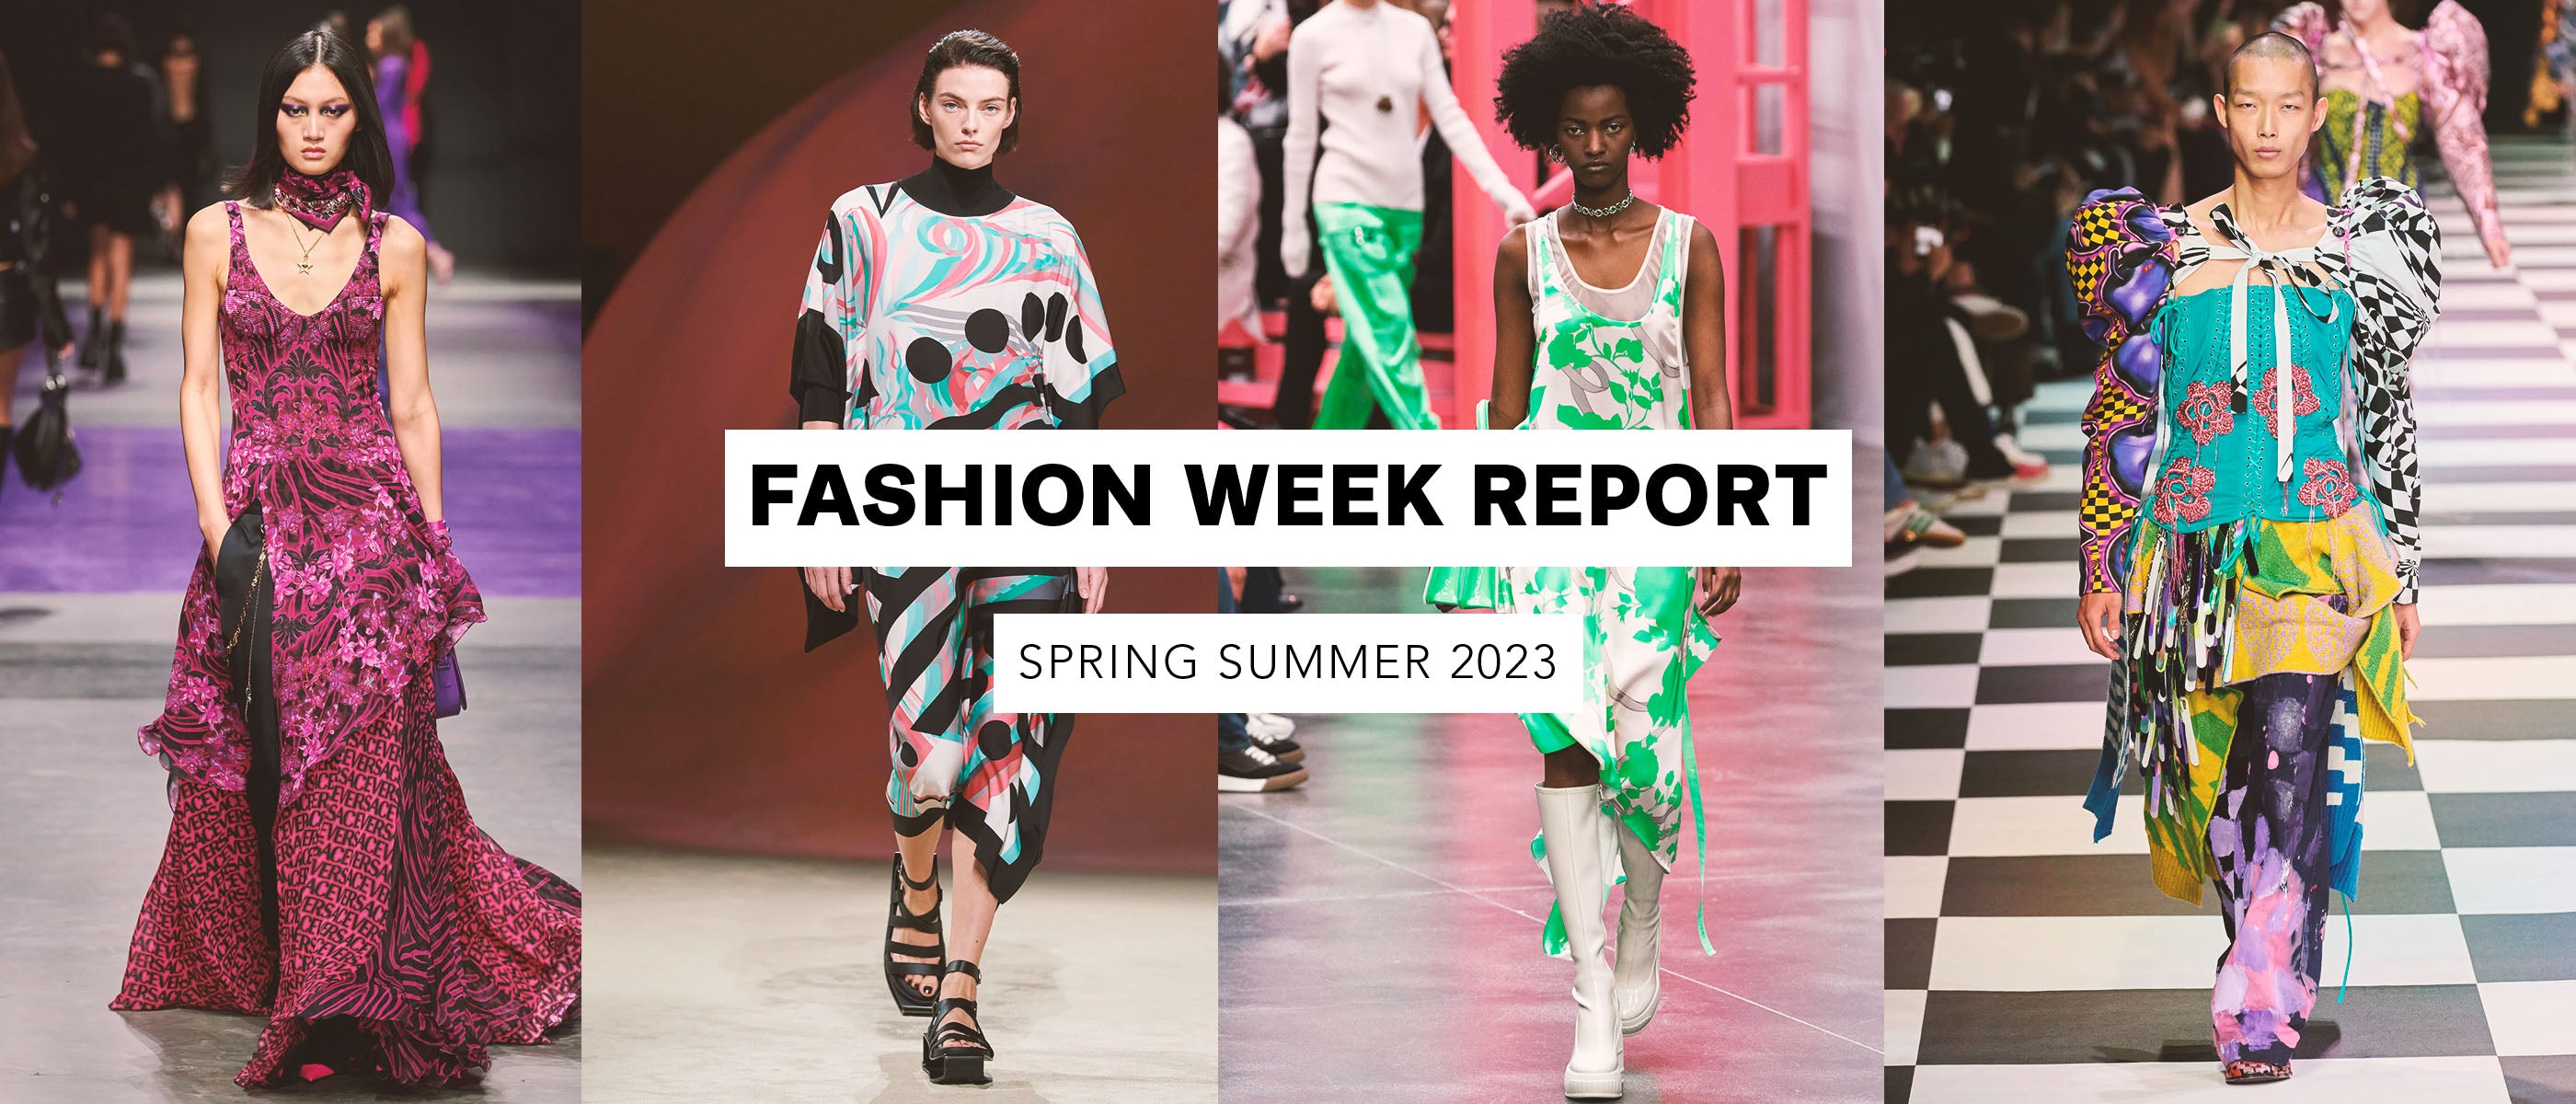 Behind the scenes: NYFW Spring 2023 collection presentation